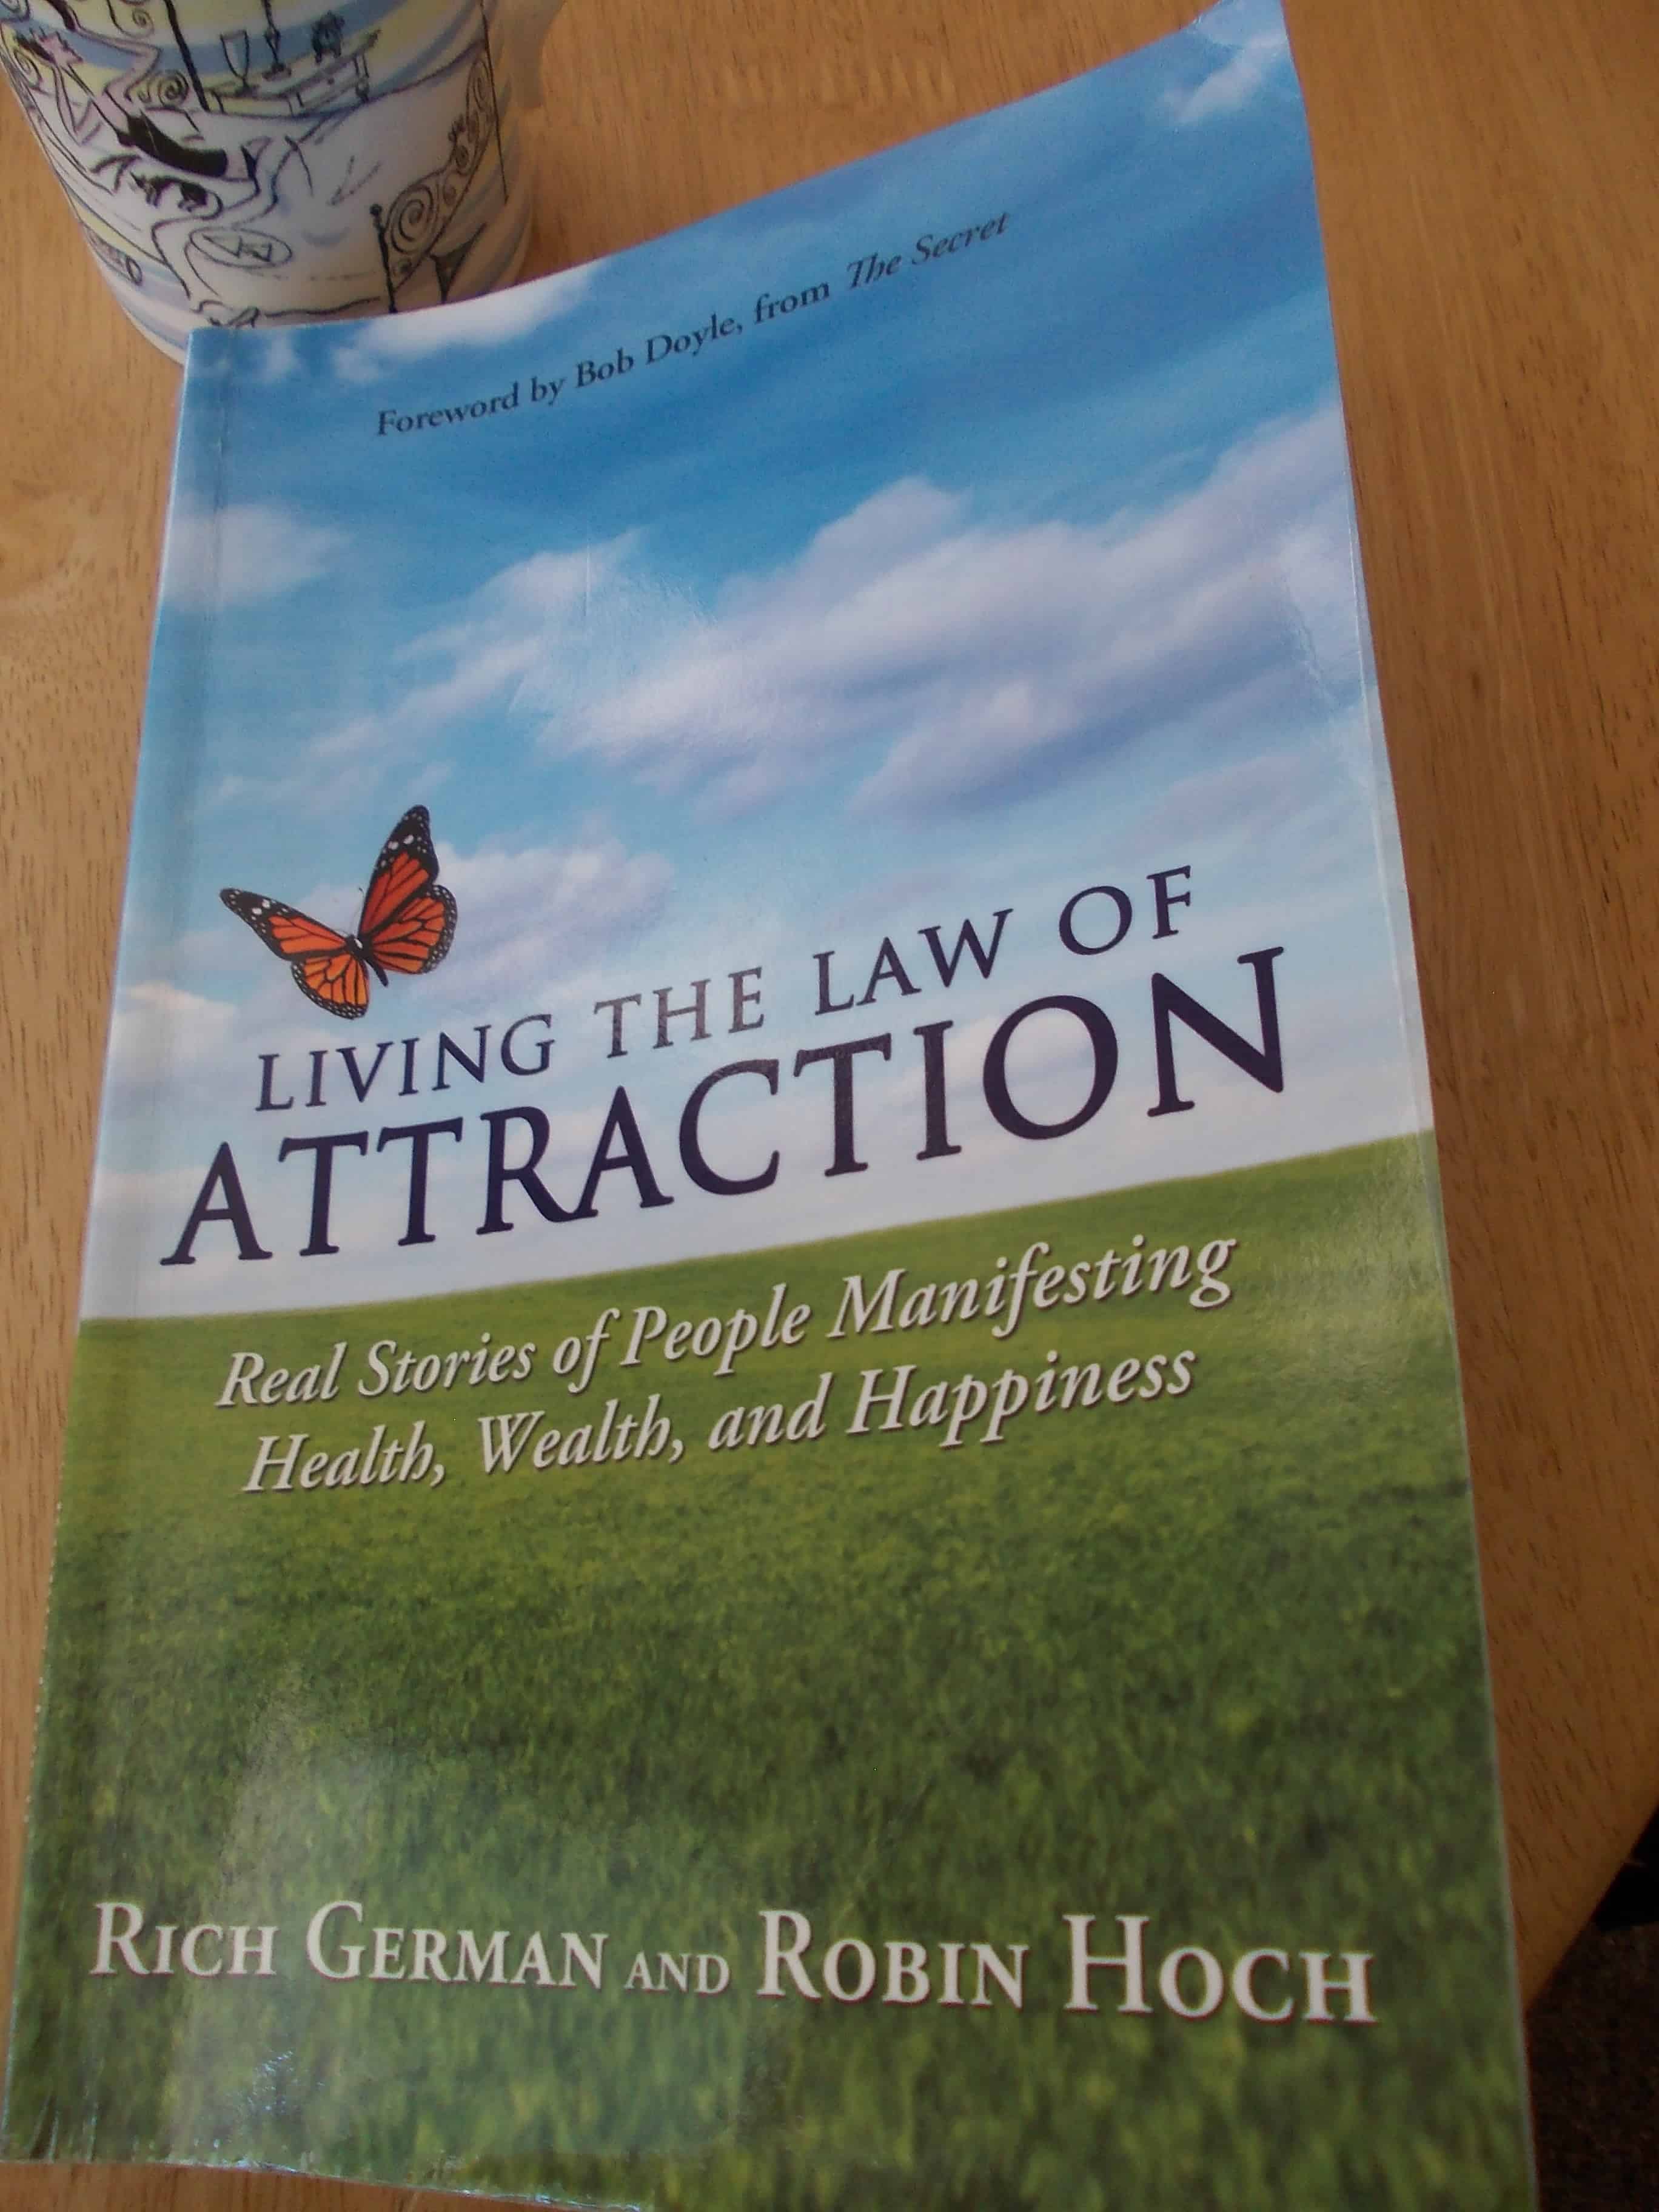 Law of attraction book review - Living the law of attraction by Rich German and Robin Hoch